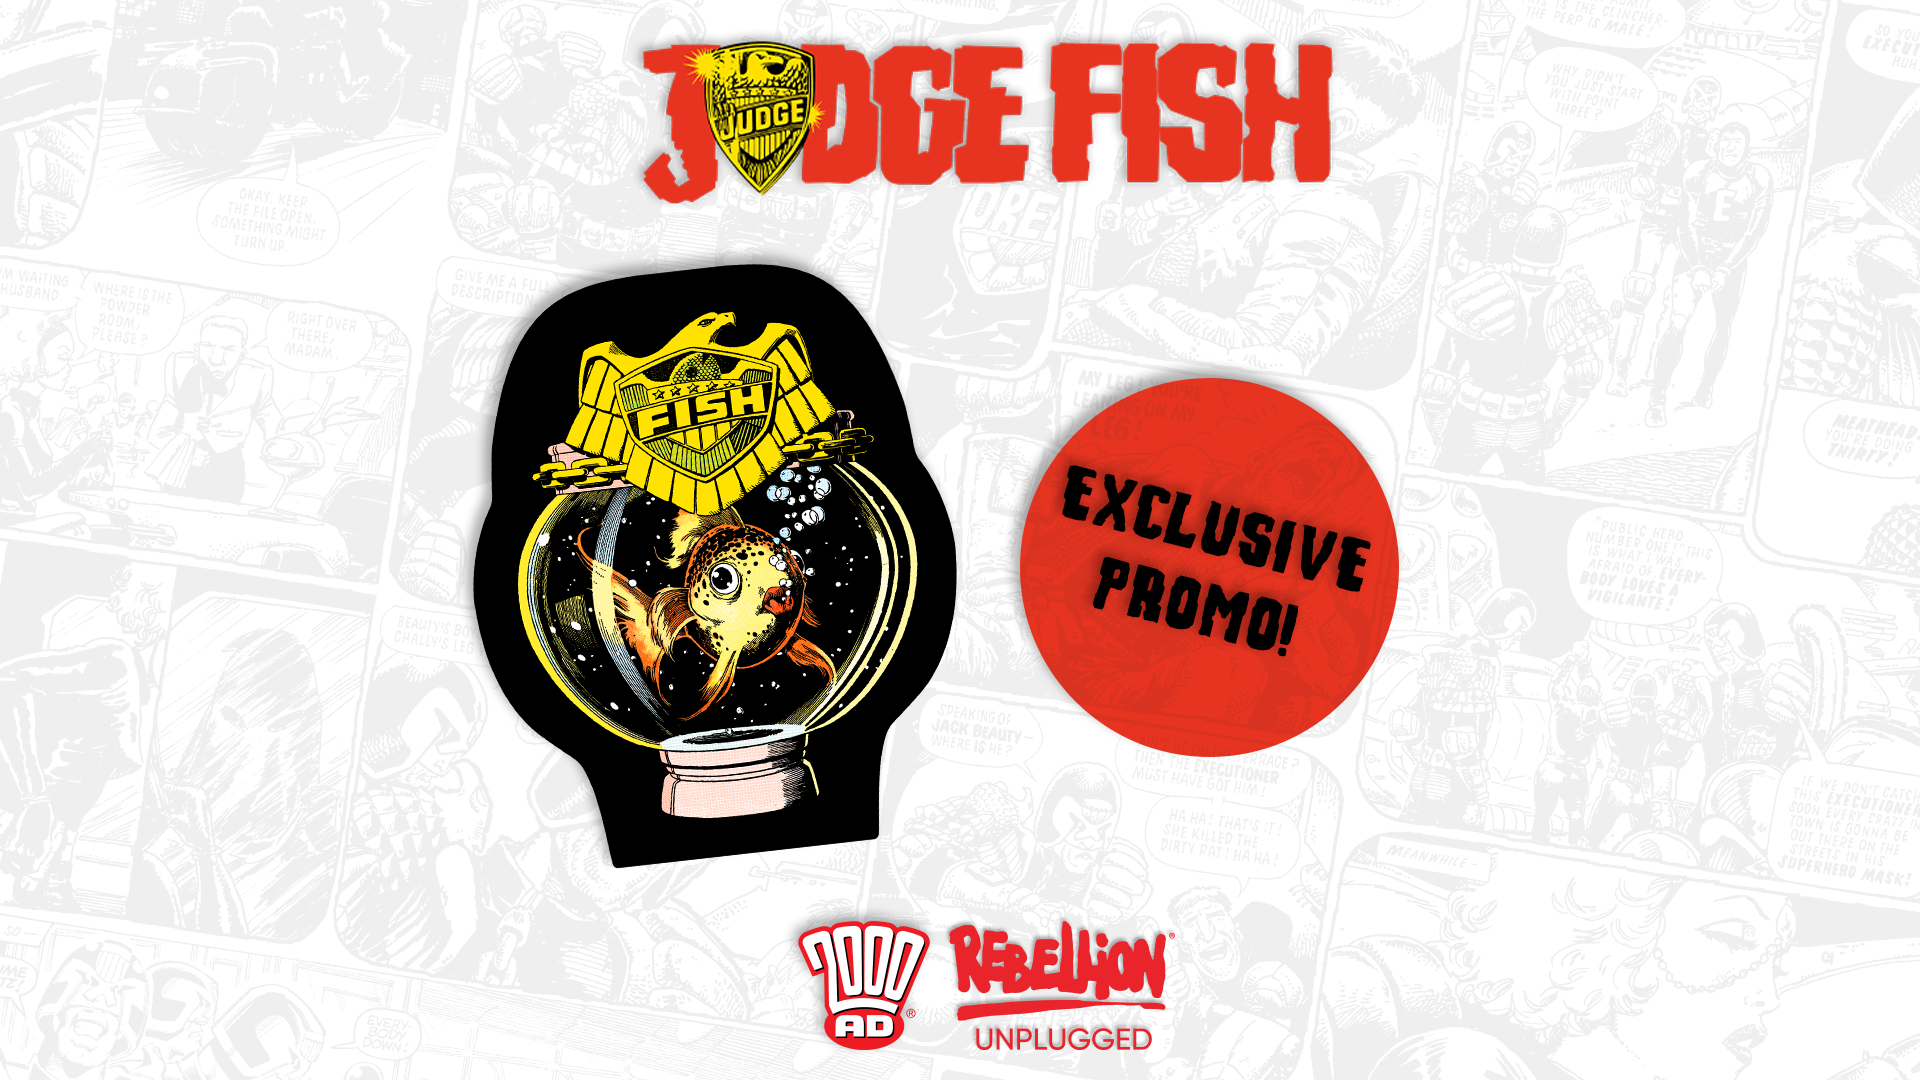 Judge Fish promo standee, exclusively available through online orders from Rebellion websites.